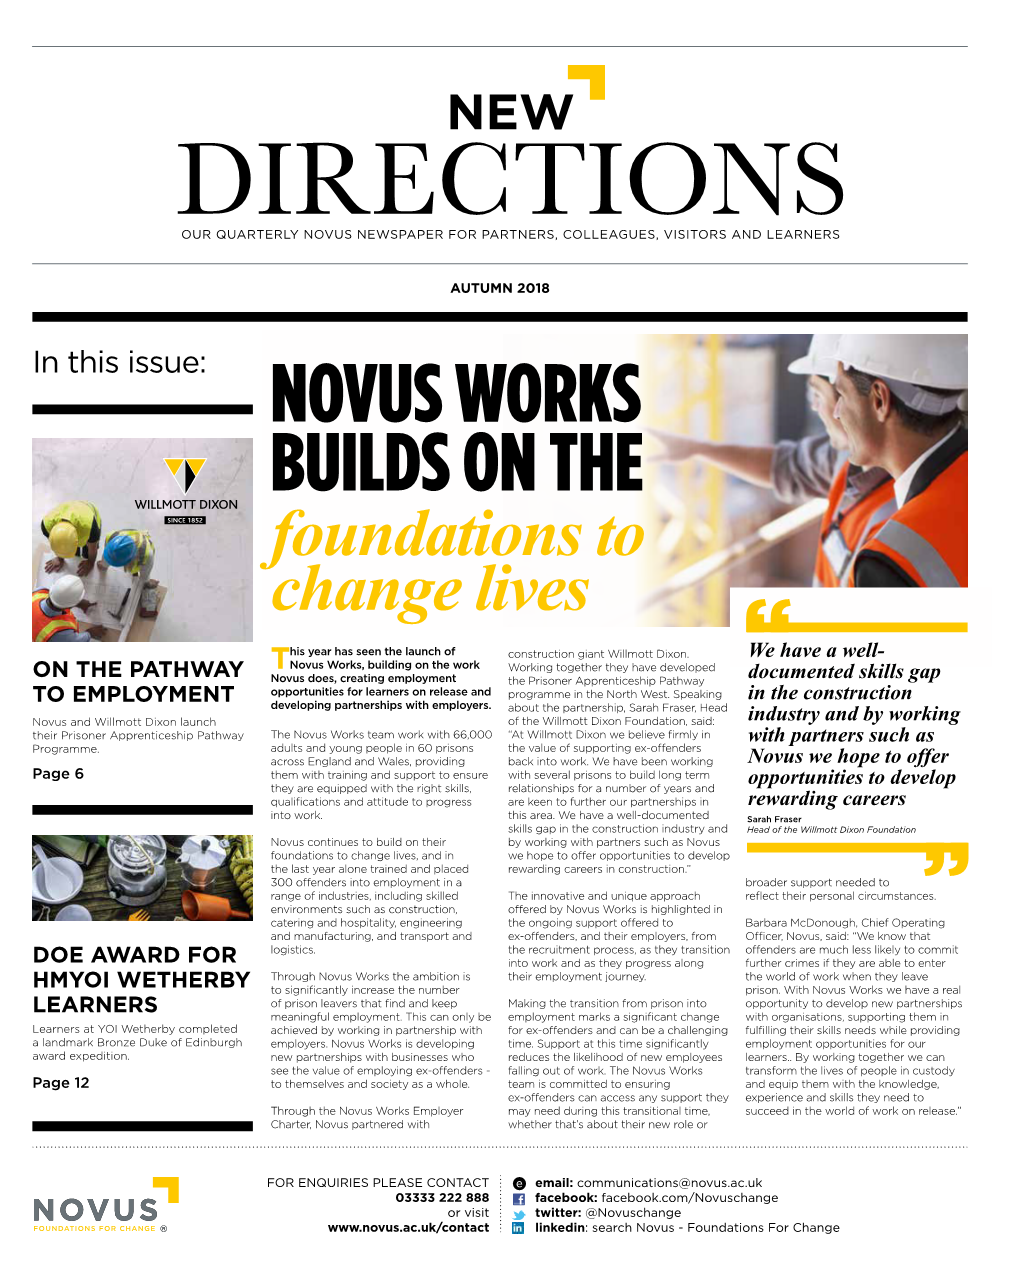 NOVUS WORKS BUILDS on the Foundations to Change Lives